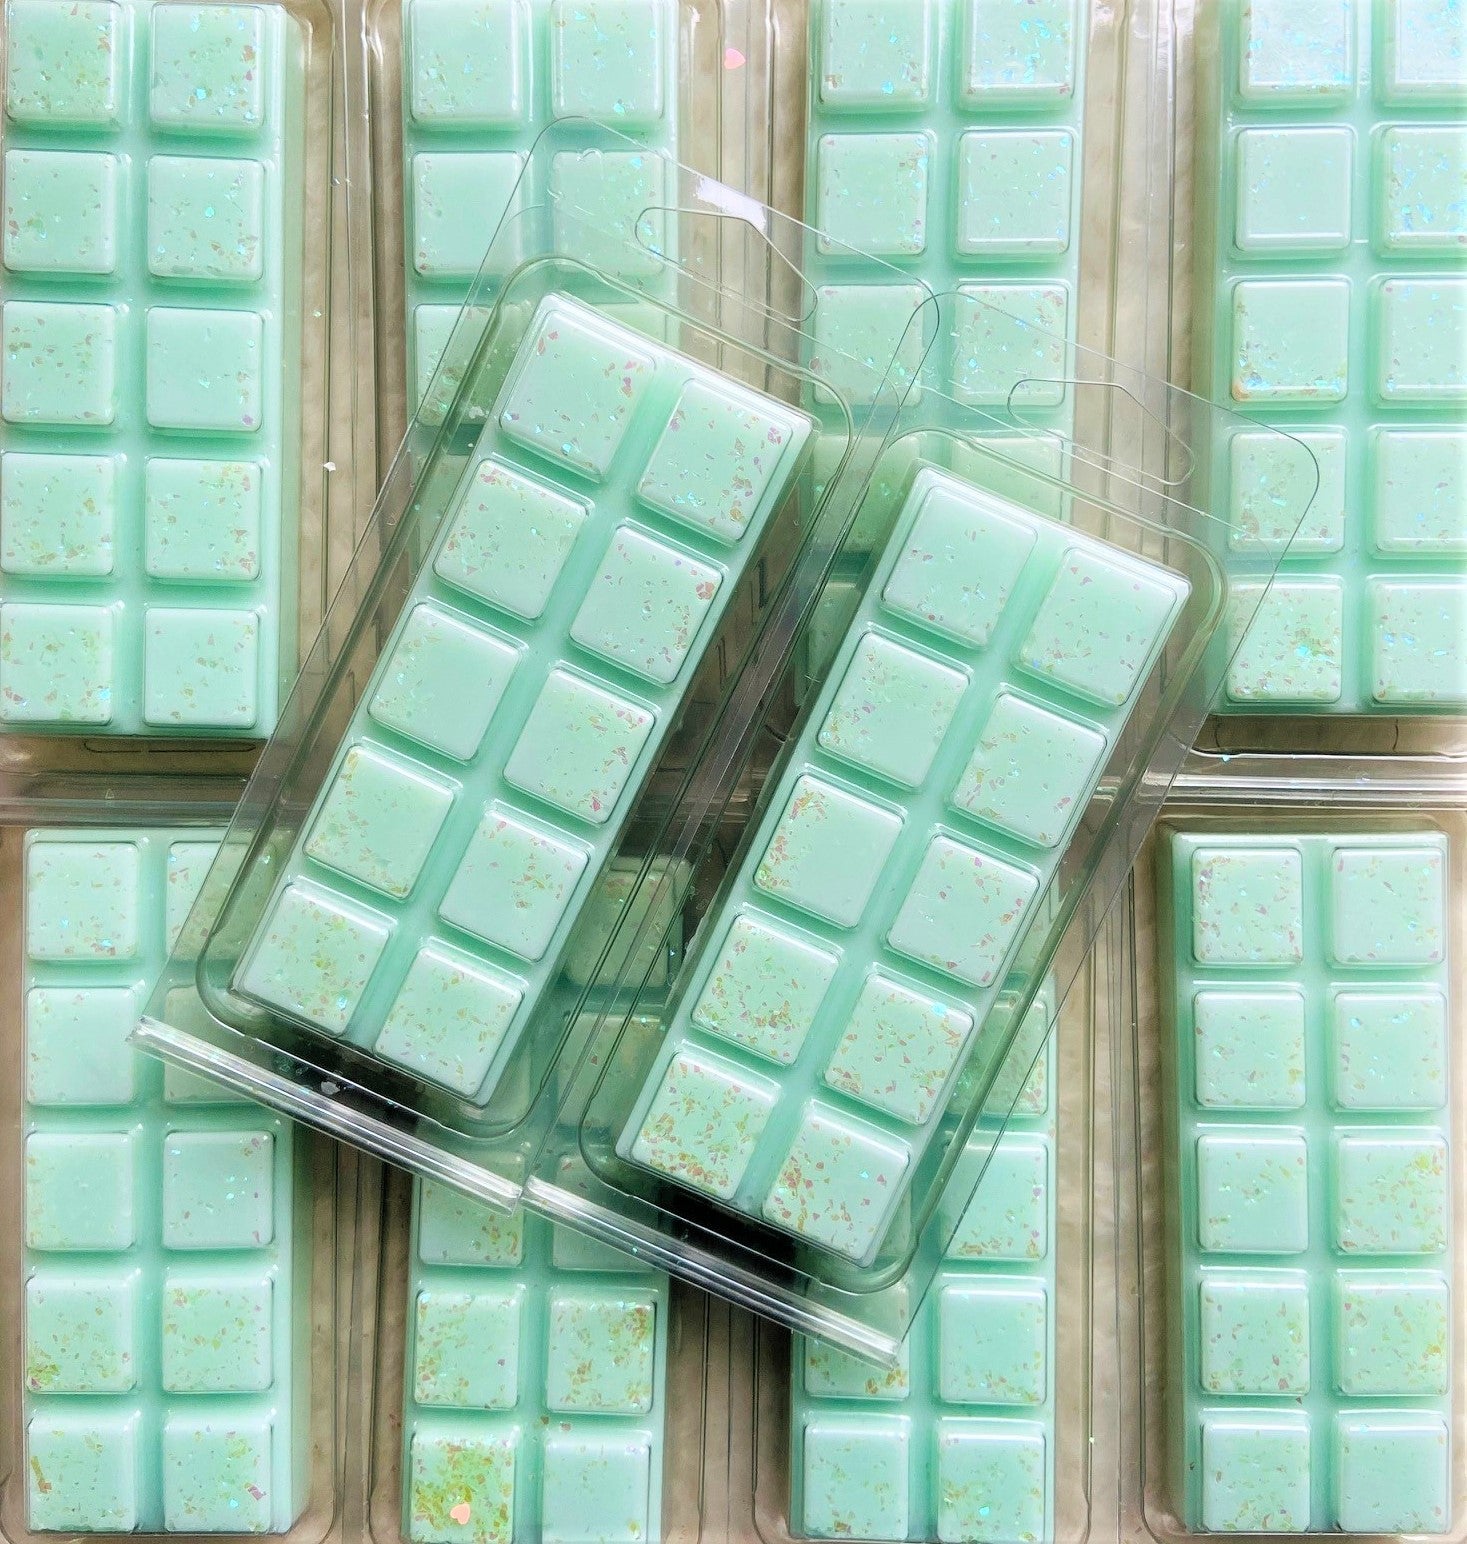 Packaged mint-green Lime Mojito Wax Melts from The Soap Gal x sprinkled with biodegradable glitter arranged in rows.